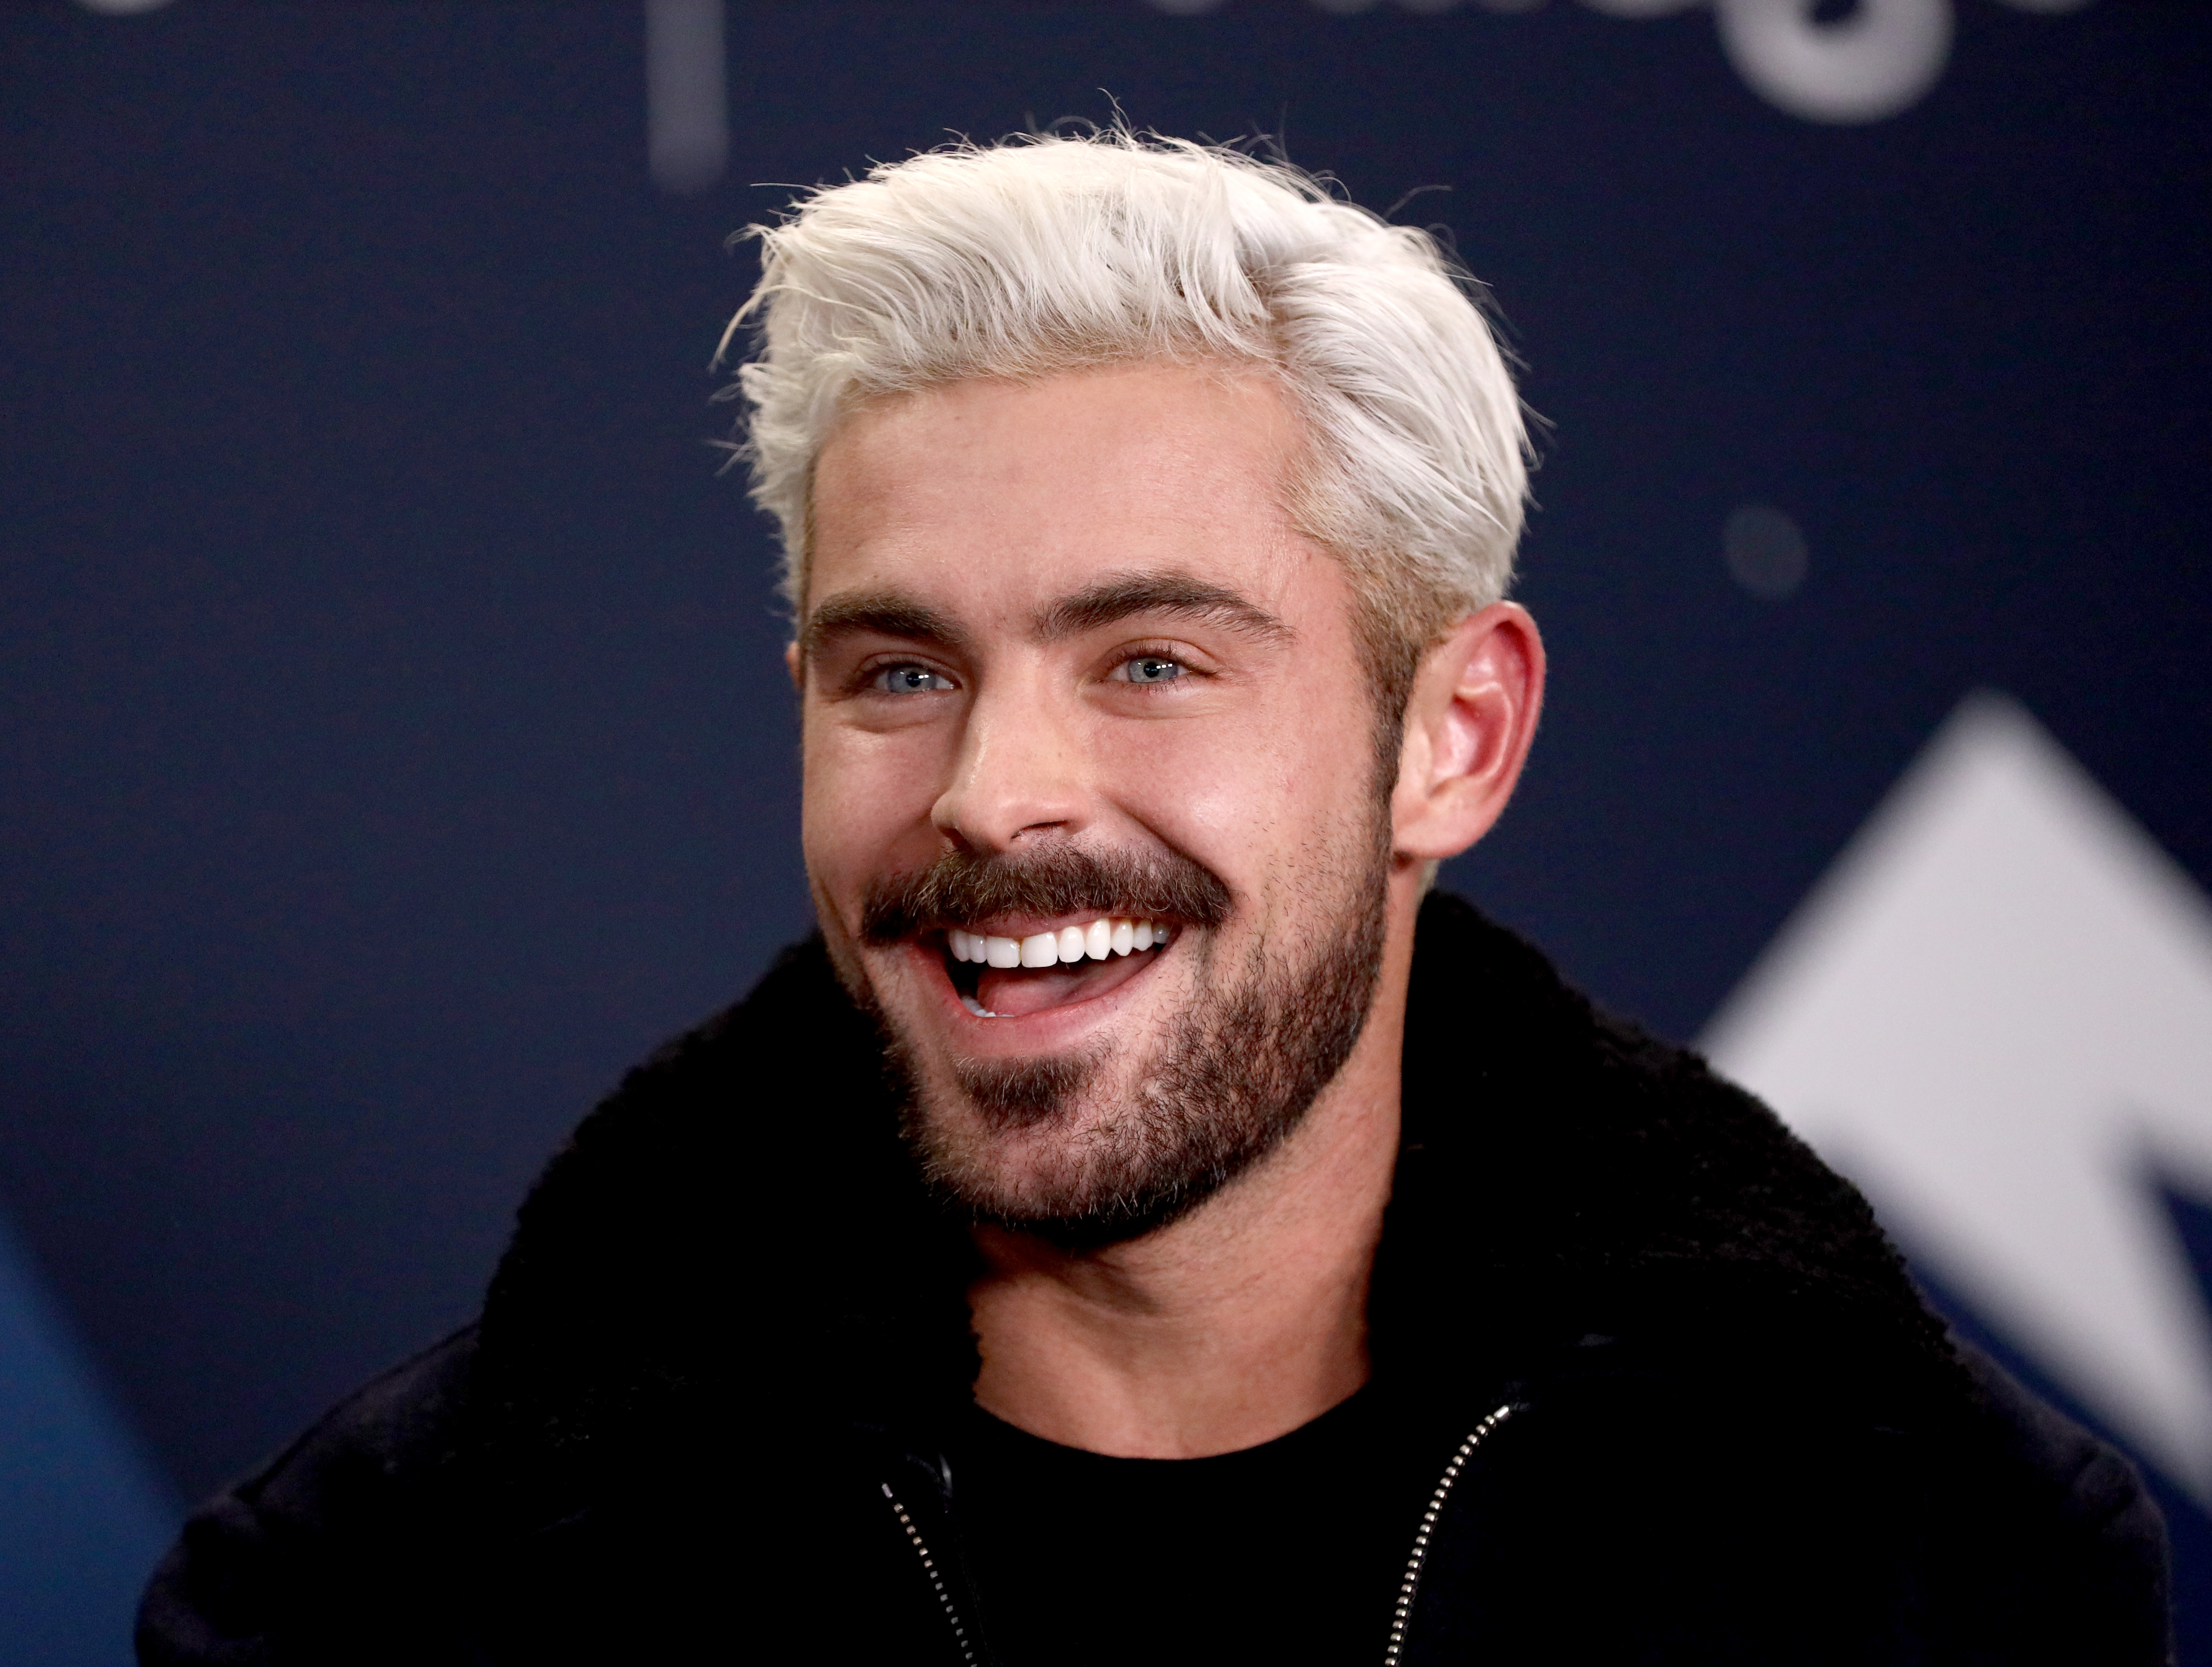 Zac Efron during promotions for "Extremely Wicked, Shockingly Evil and Vile" at the IMDb Studio on location at Day 2 of the 2019 Sundance Film Festival in Park City, Utah on January 26, 2019 | Source: Getty Images